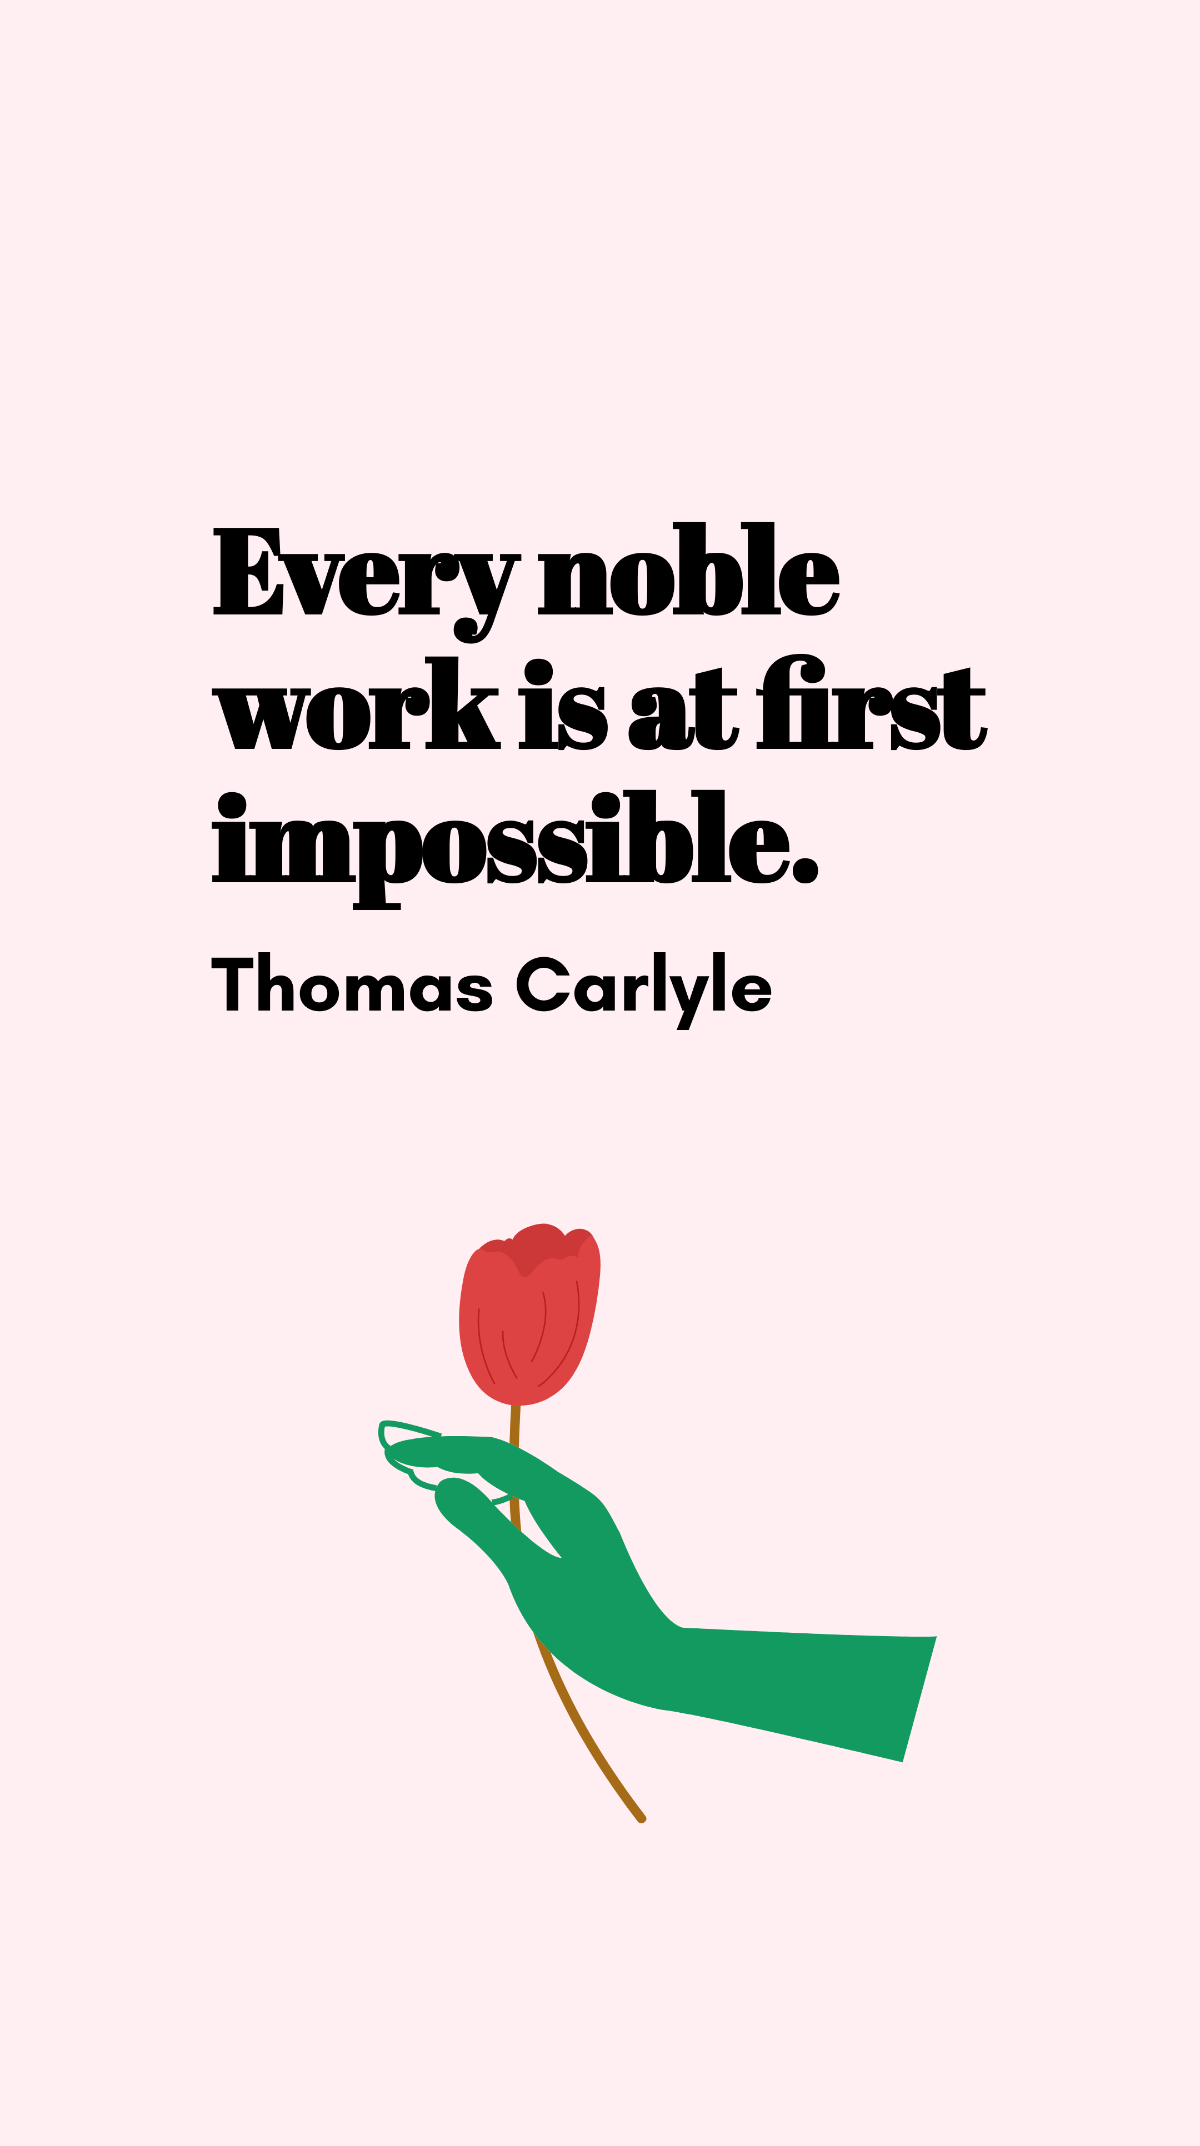 Free Thomas Carlyle - Every noble work is at first impossible. Template